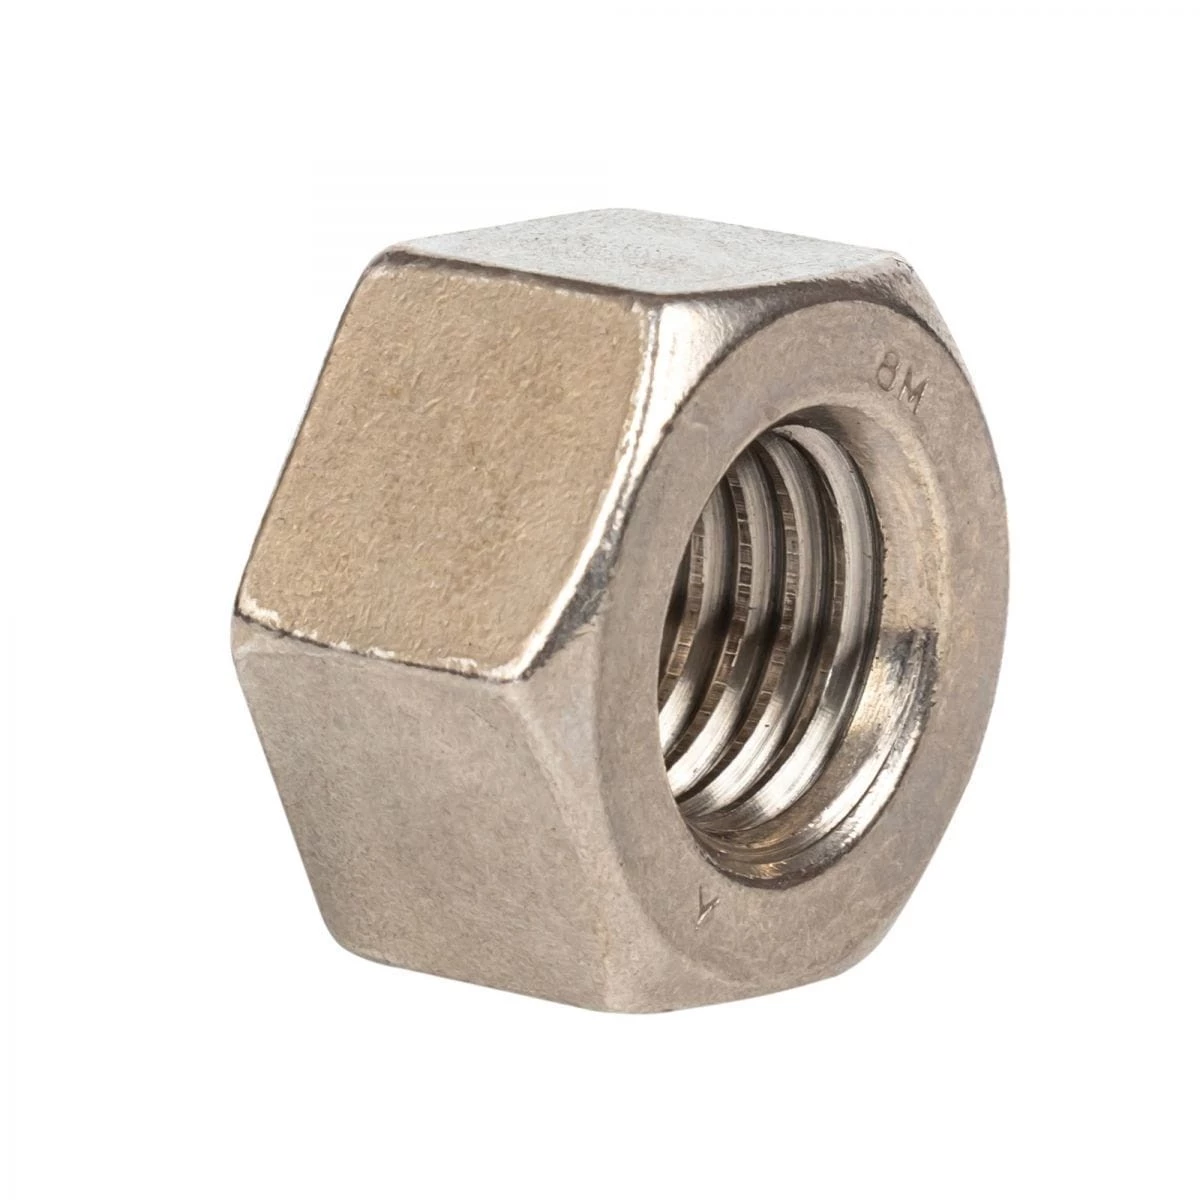 Stainless Steel Heavy Hex Nut, ASTM A194 8M, 7/8 Inch, 9 UNC